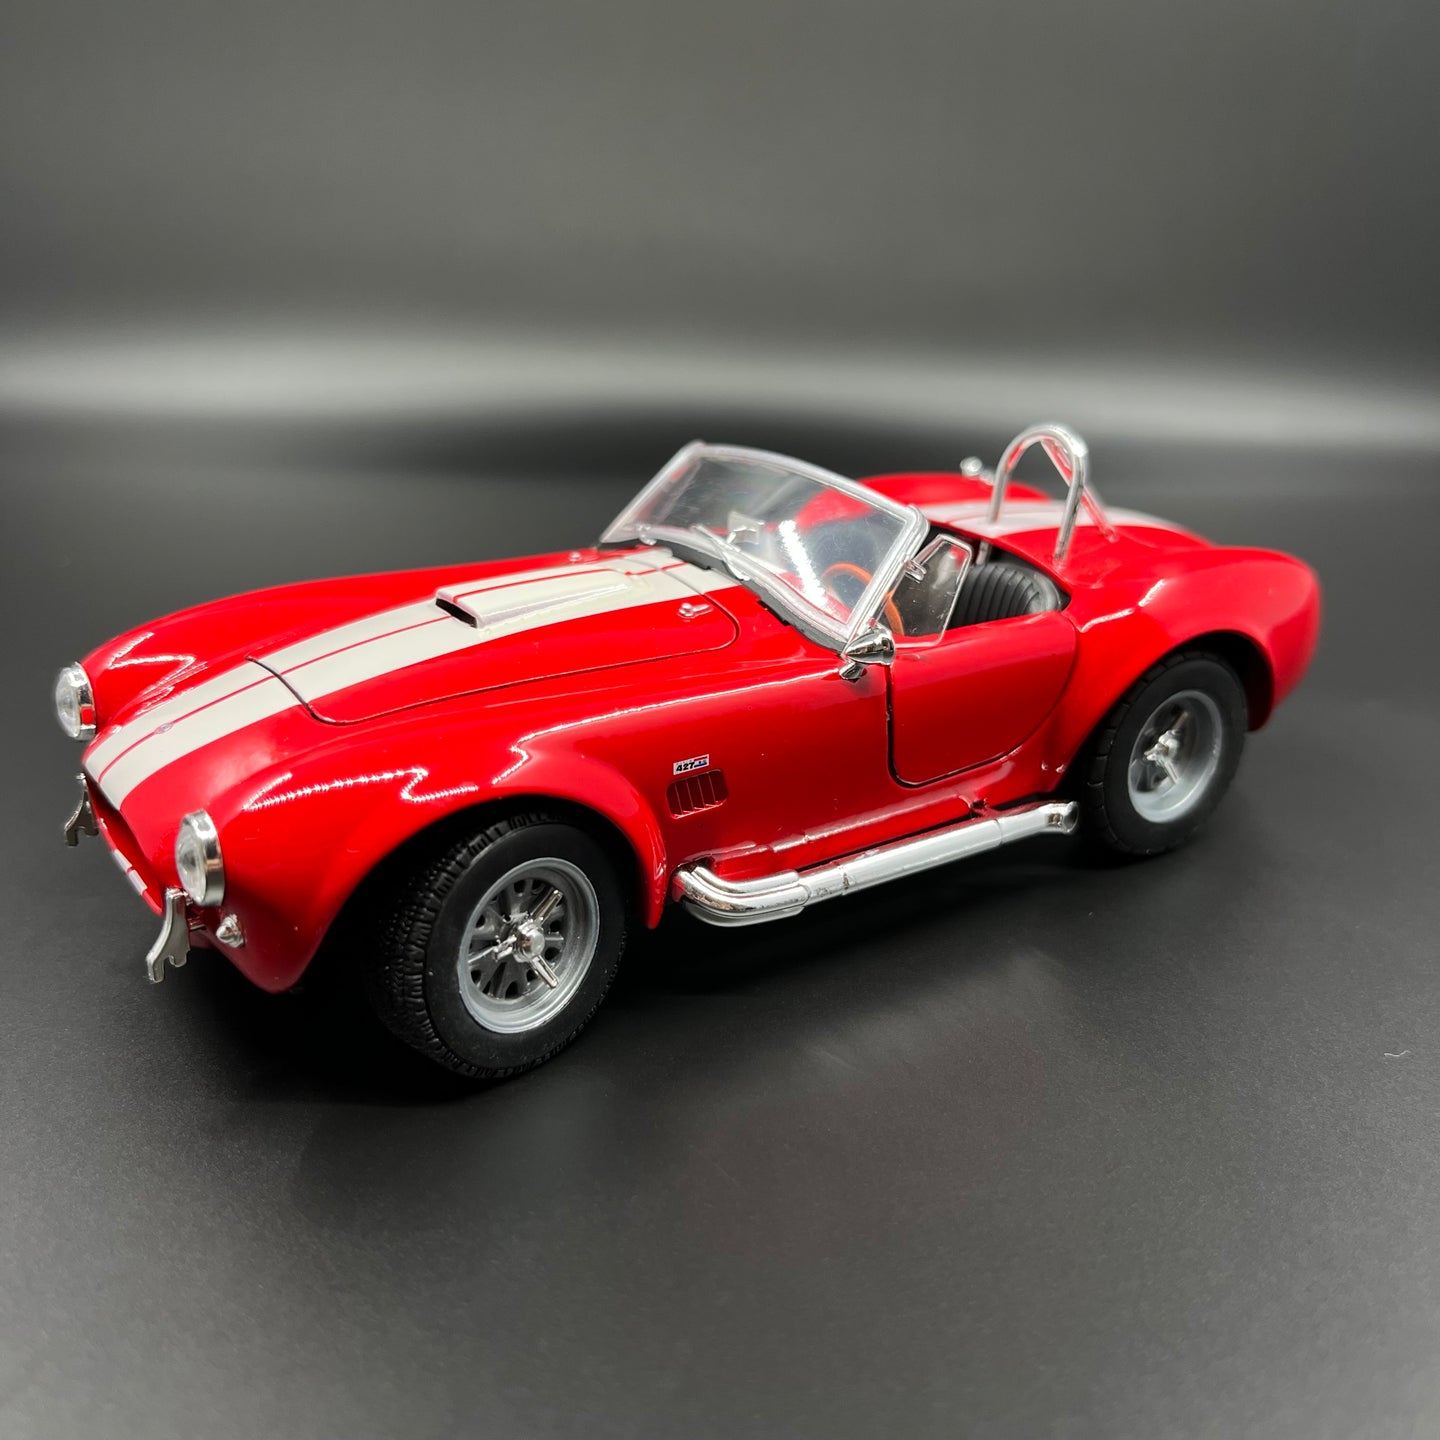 1965 Shelby Cobra 427 Blue Diecast Car Model 1:24 By Welly